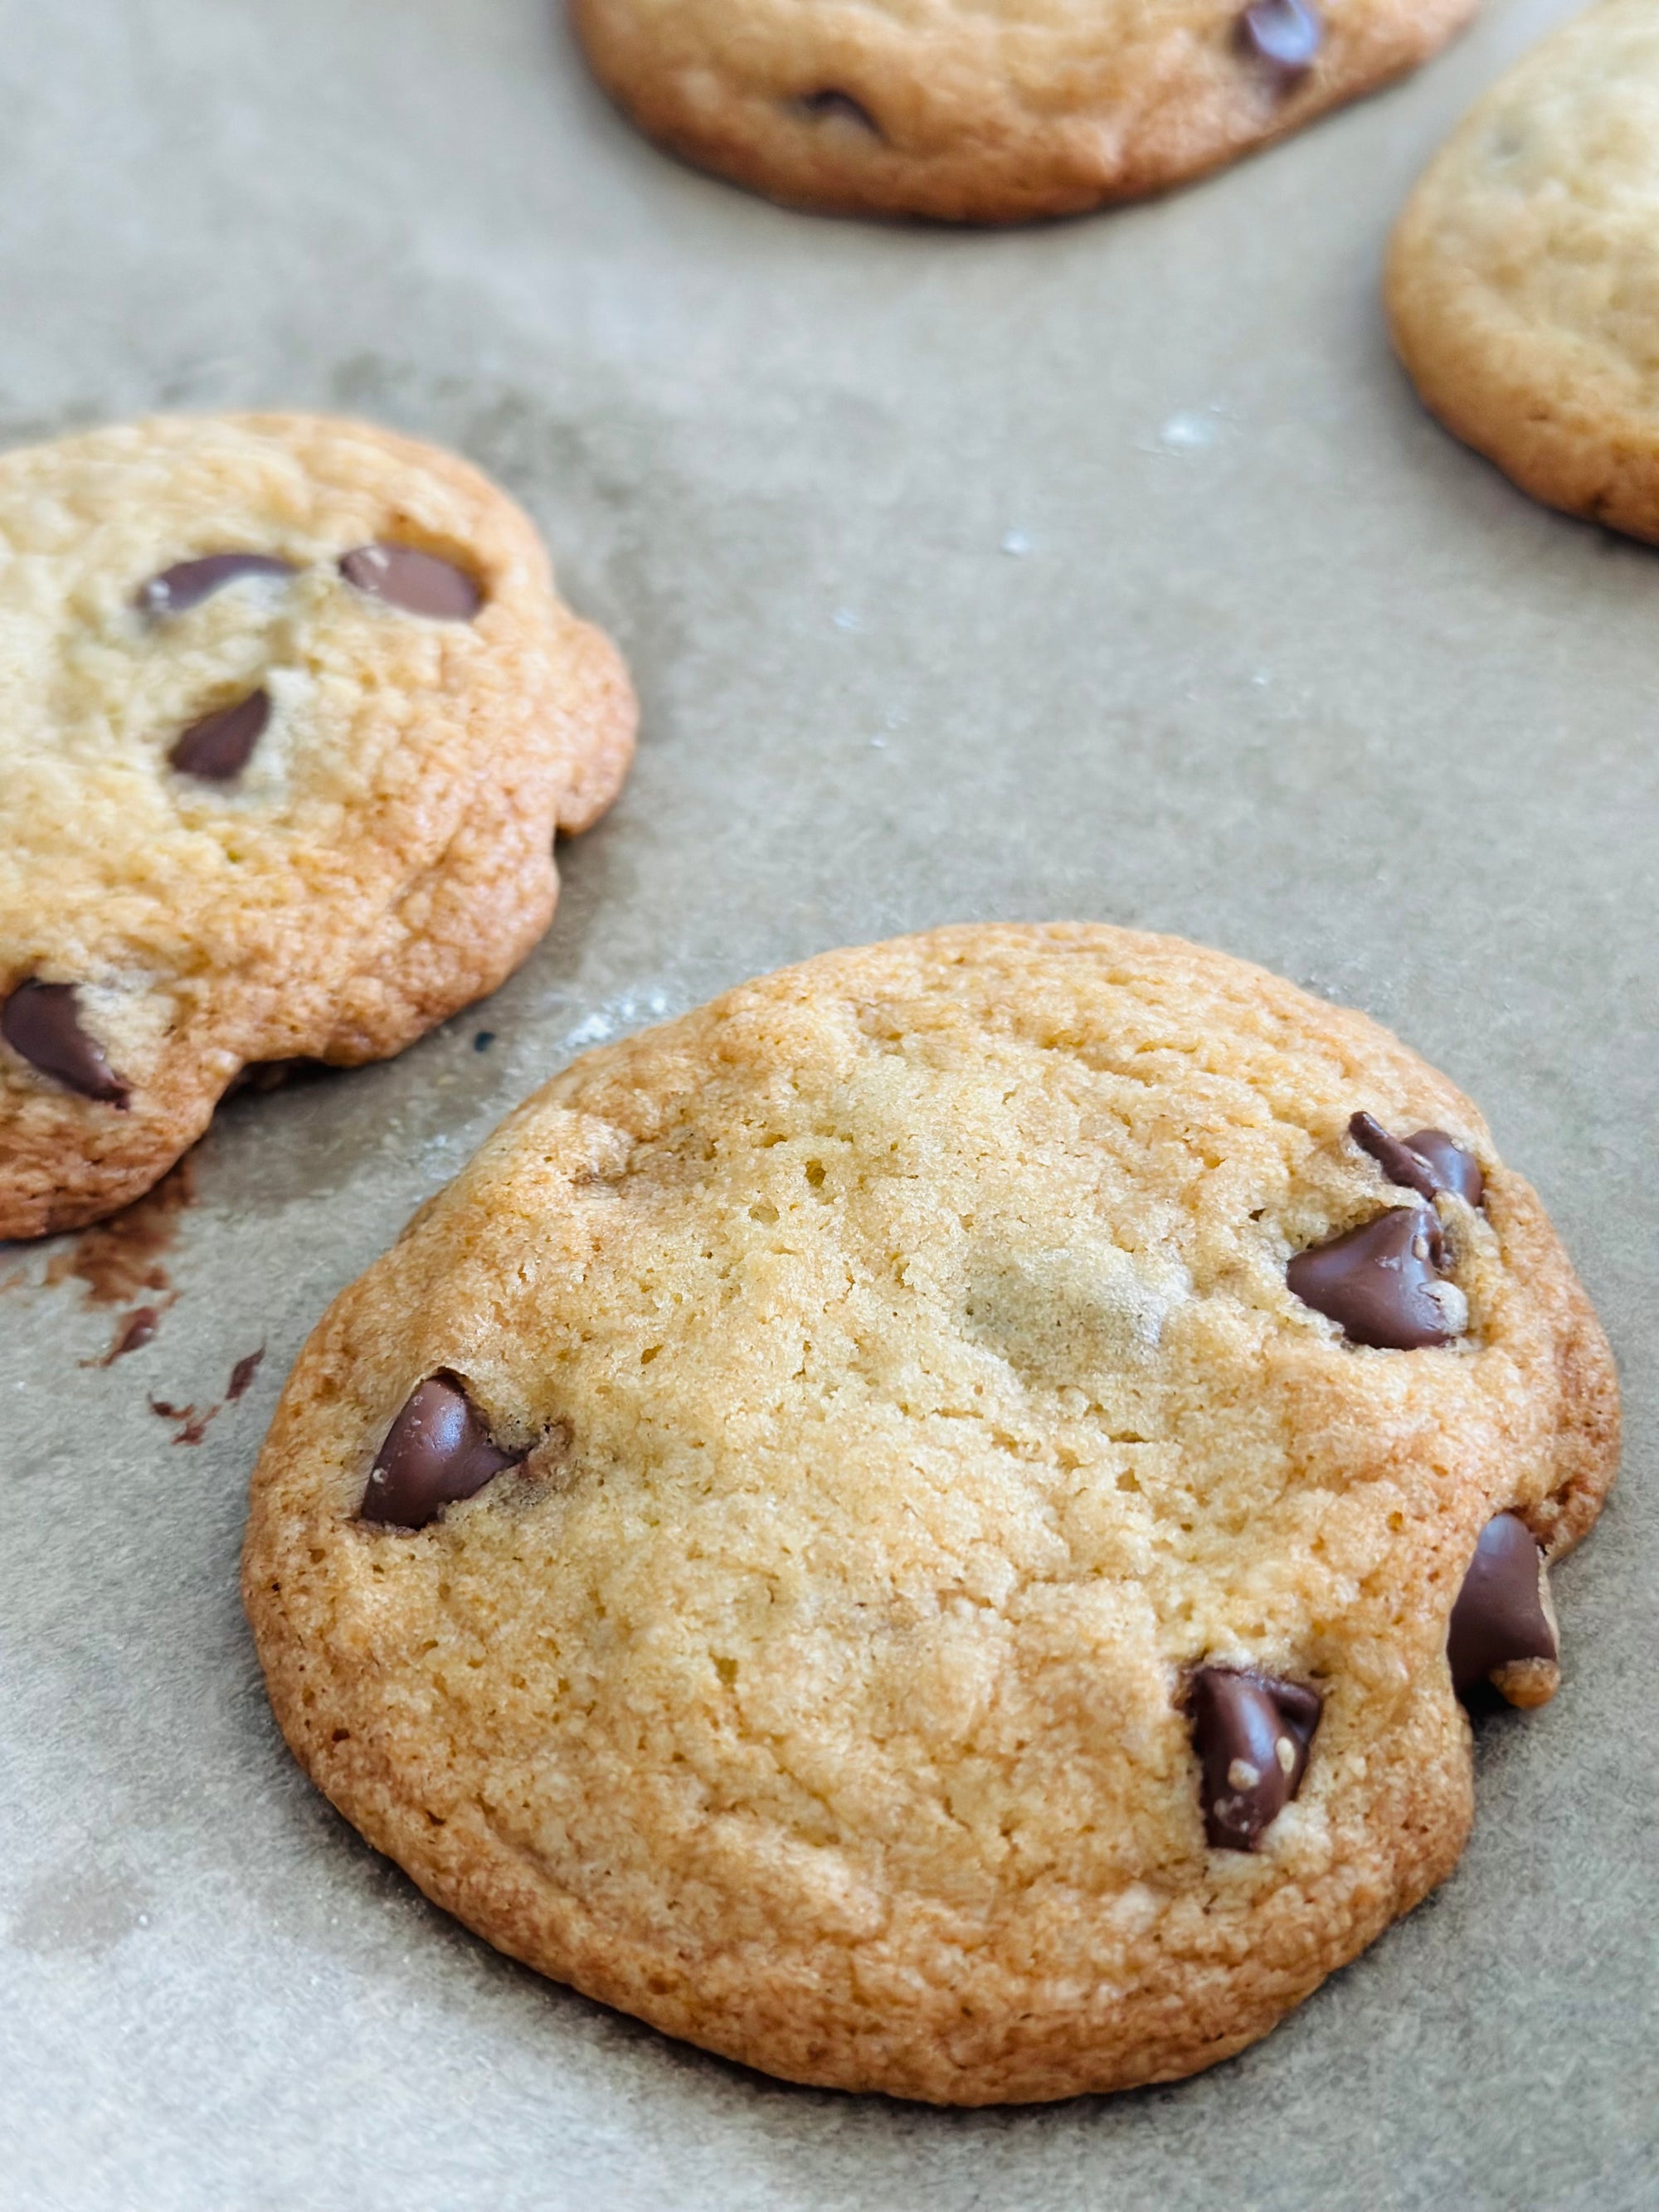 A Great, Classic Chocolate Chip Cookie!